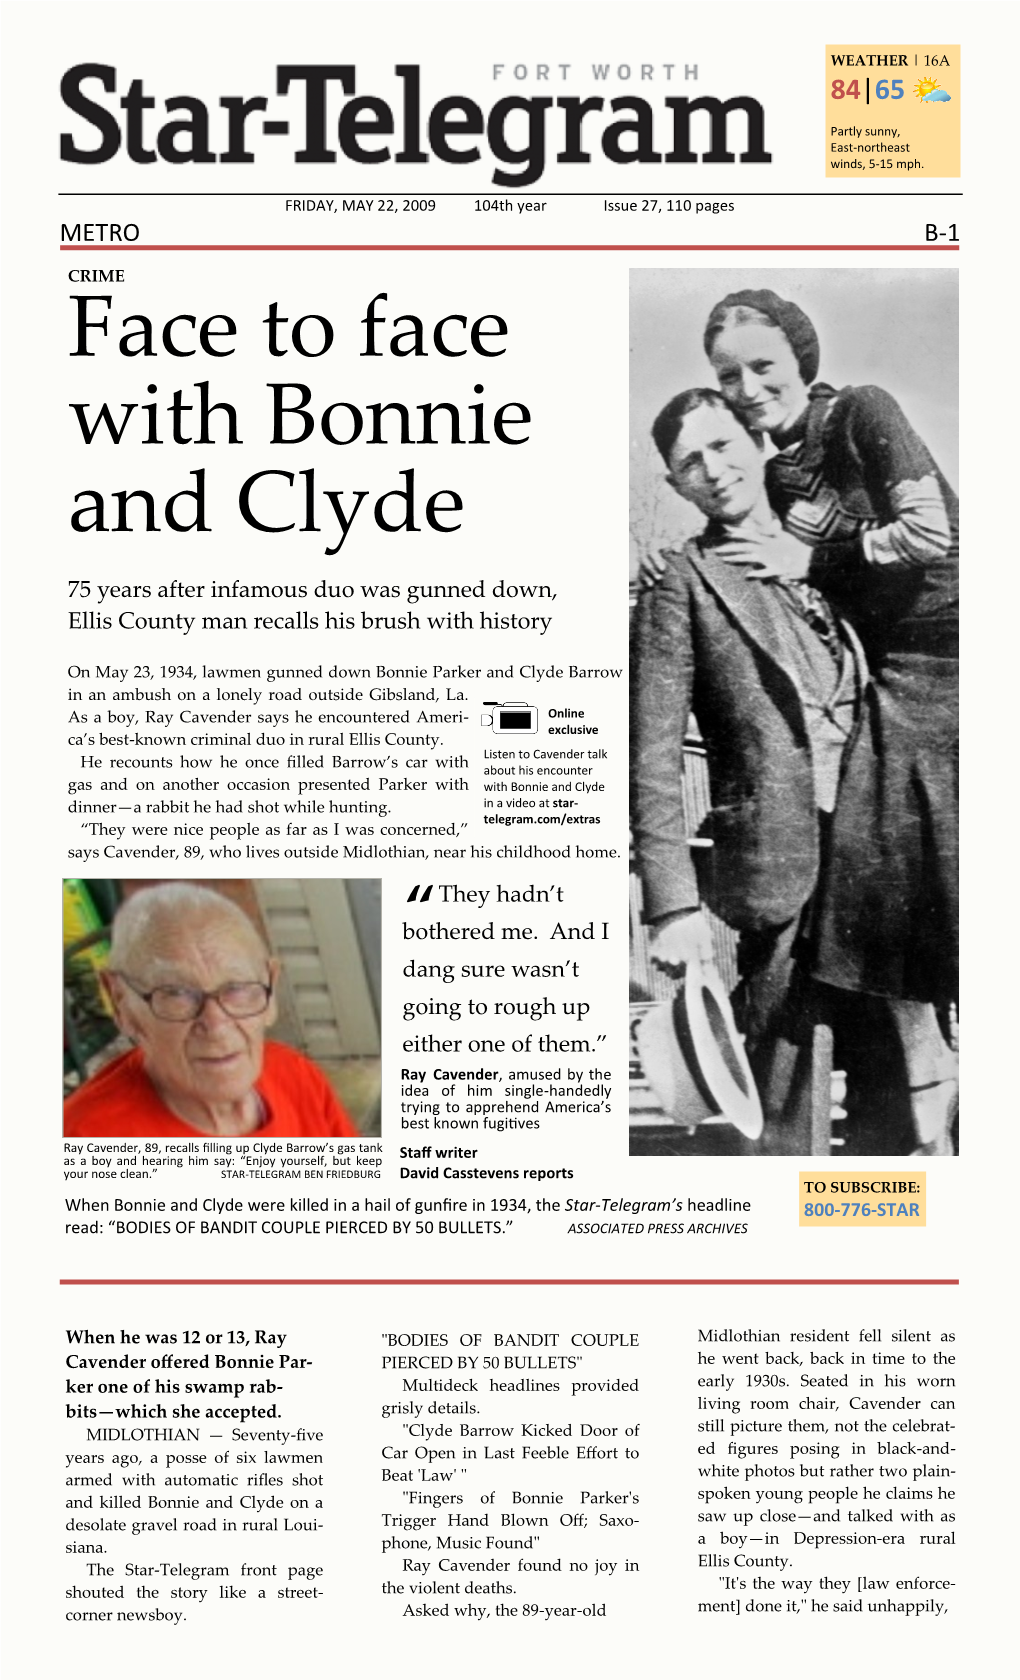 Face to Face with Bonnie and Clyde